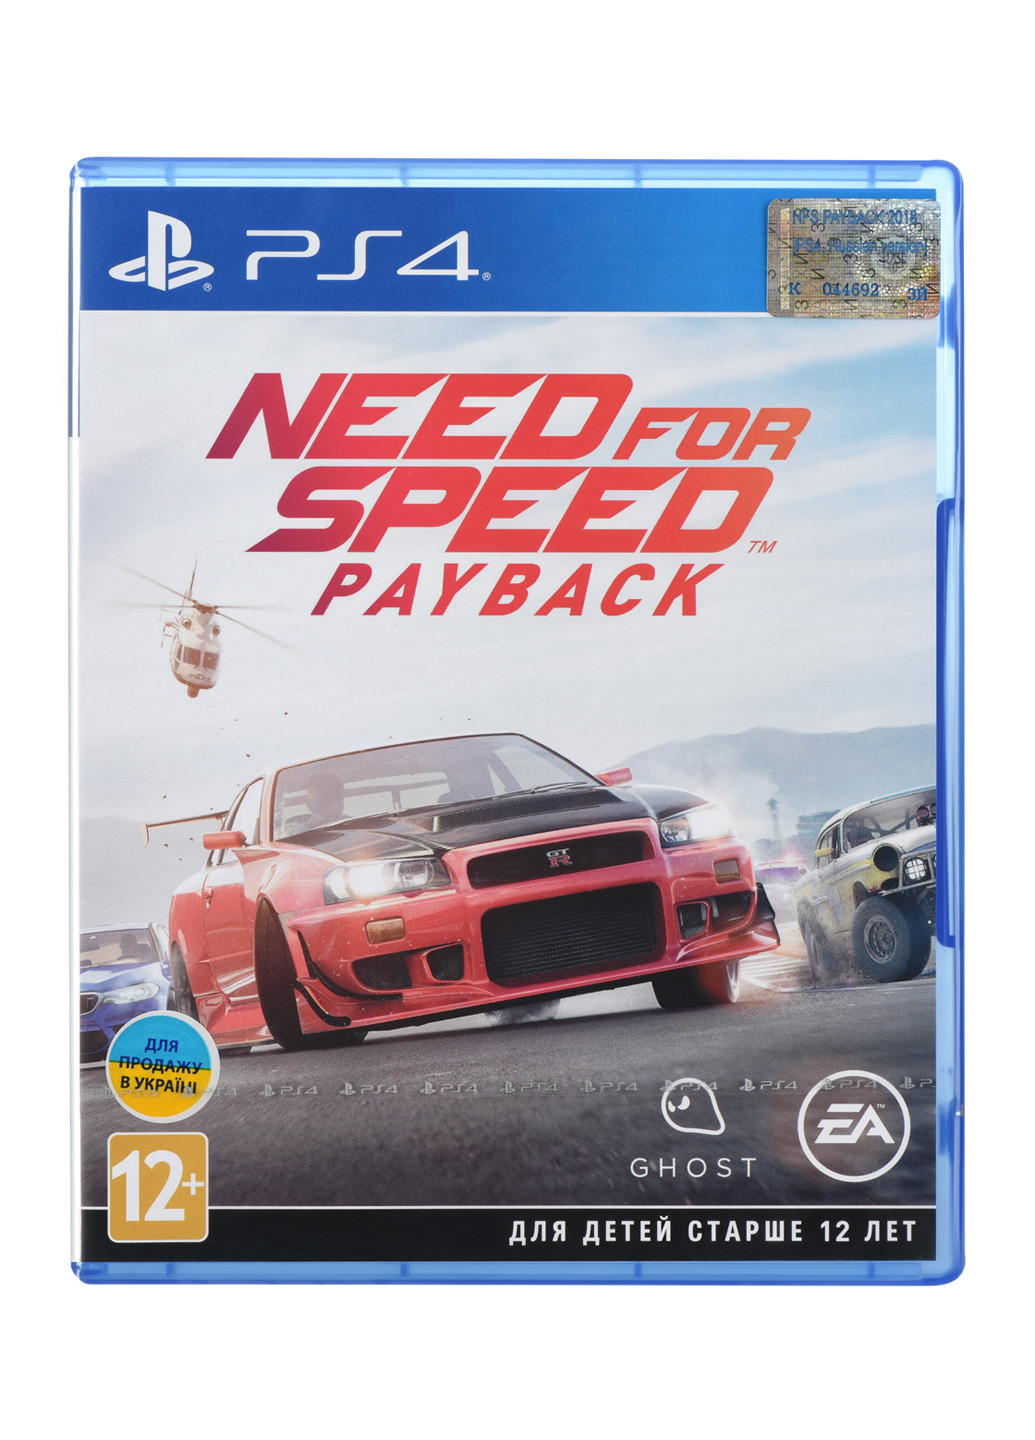 Games Software игра ps4 need for speed payback 2018 [blu-ray диск] (150134305)